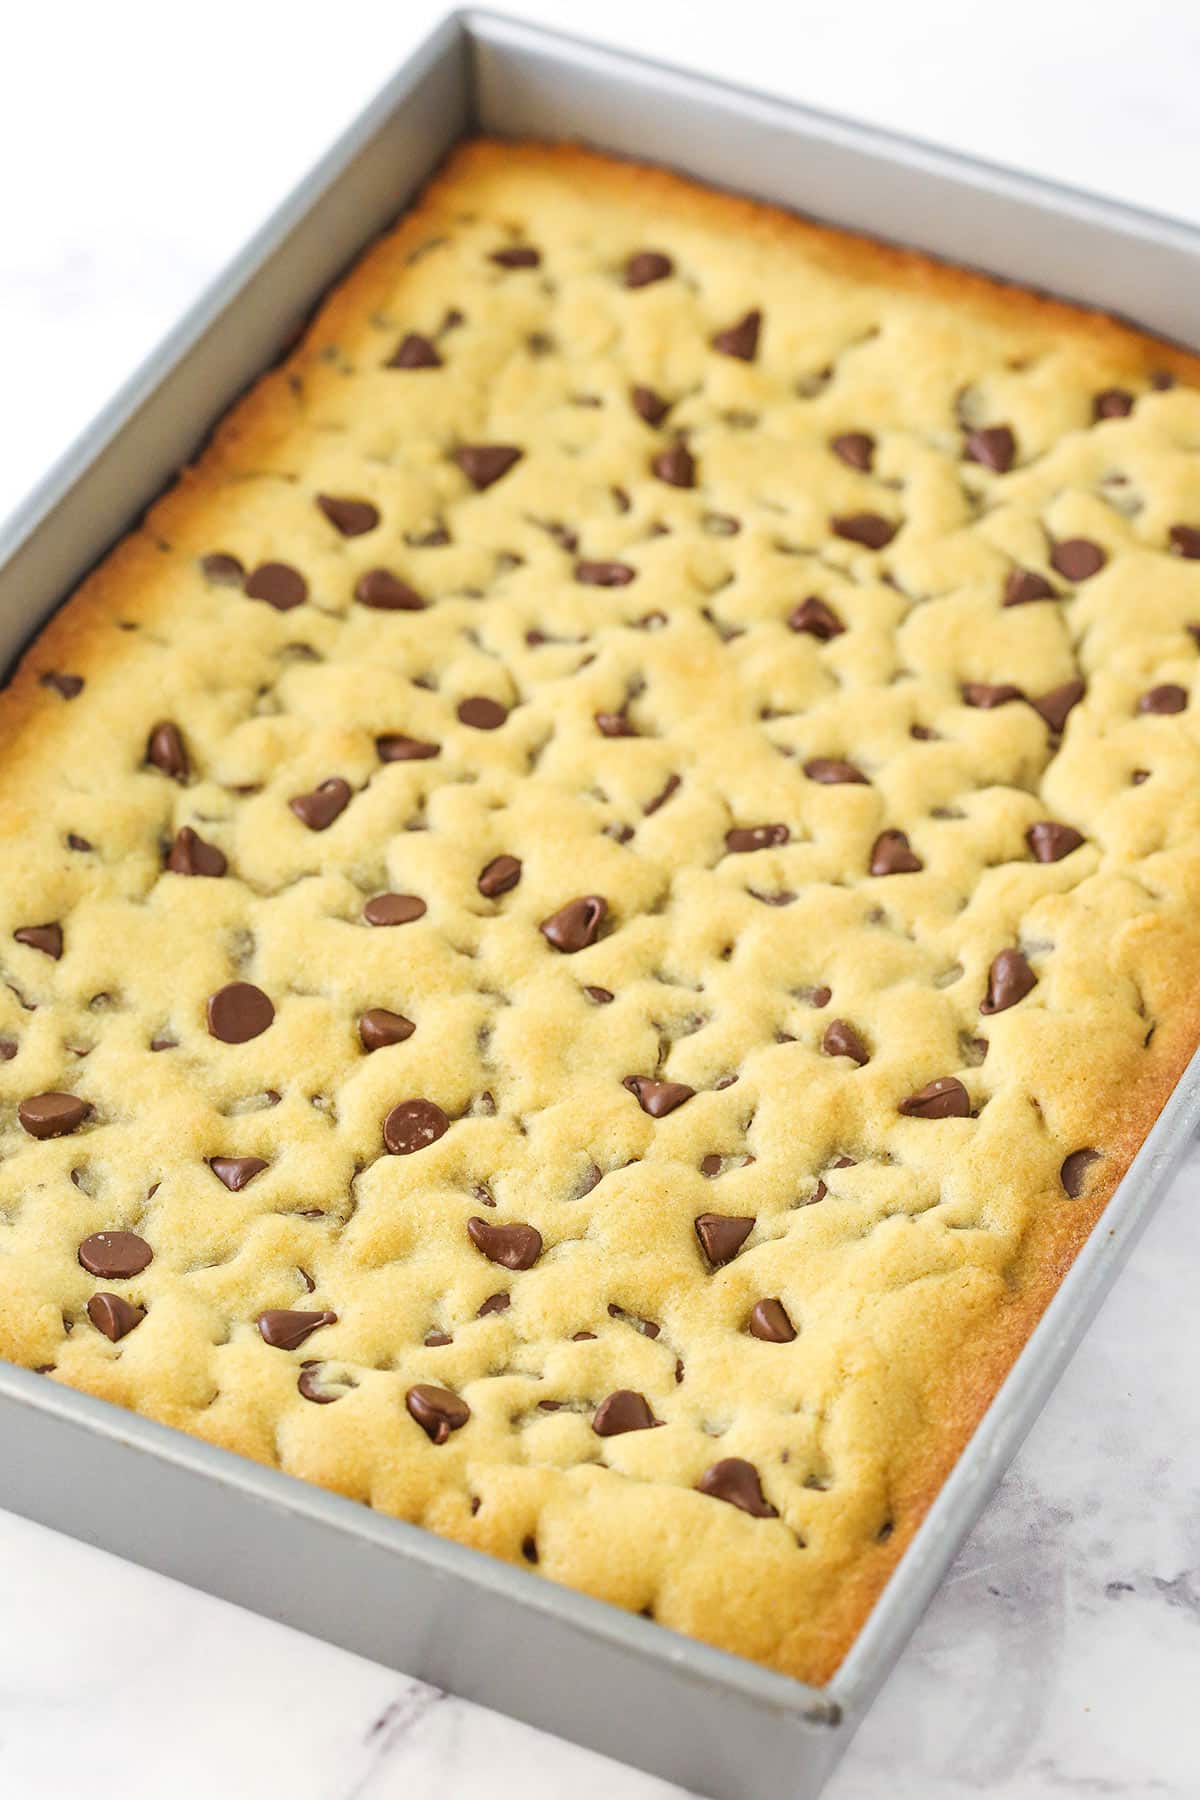 A chocolate chip cookie cake inside of a metal sheet pan on a kitchen countertop